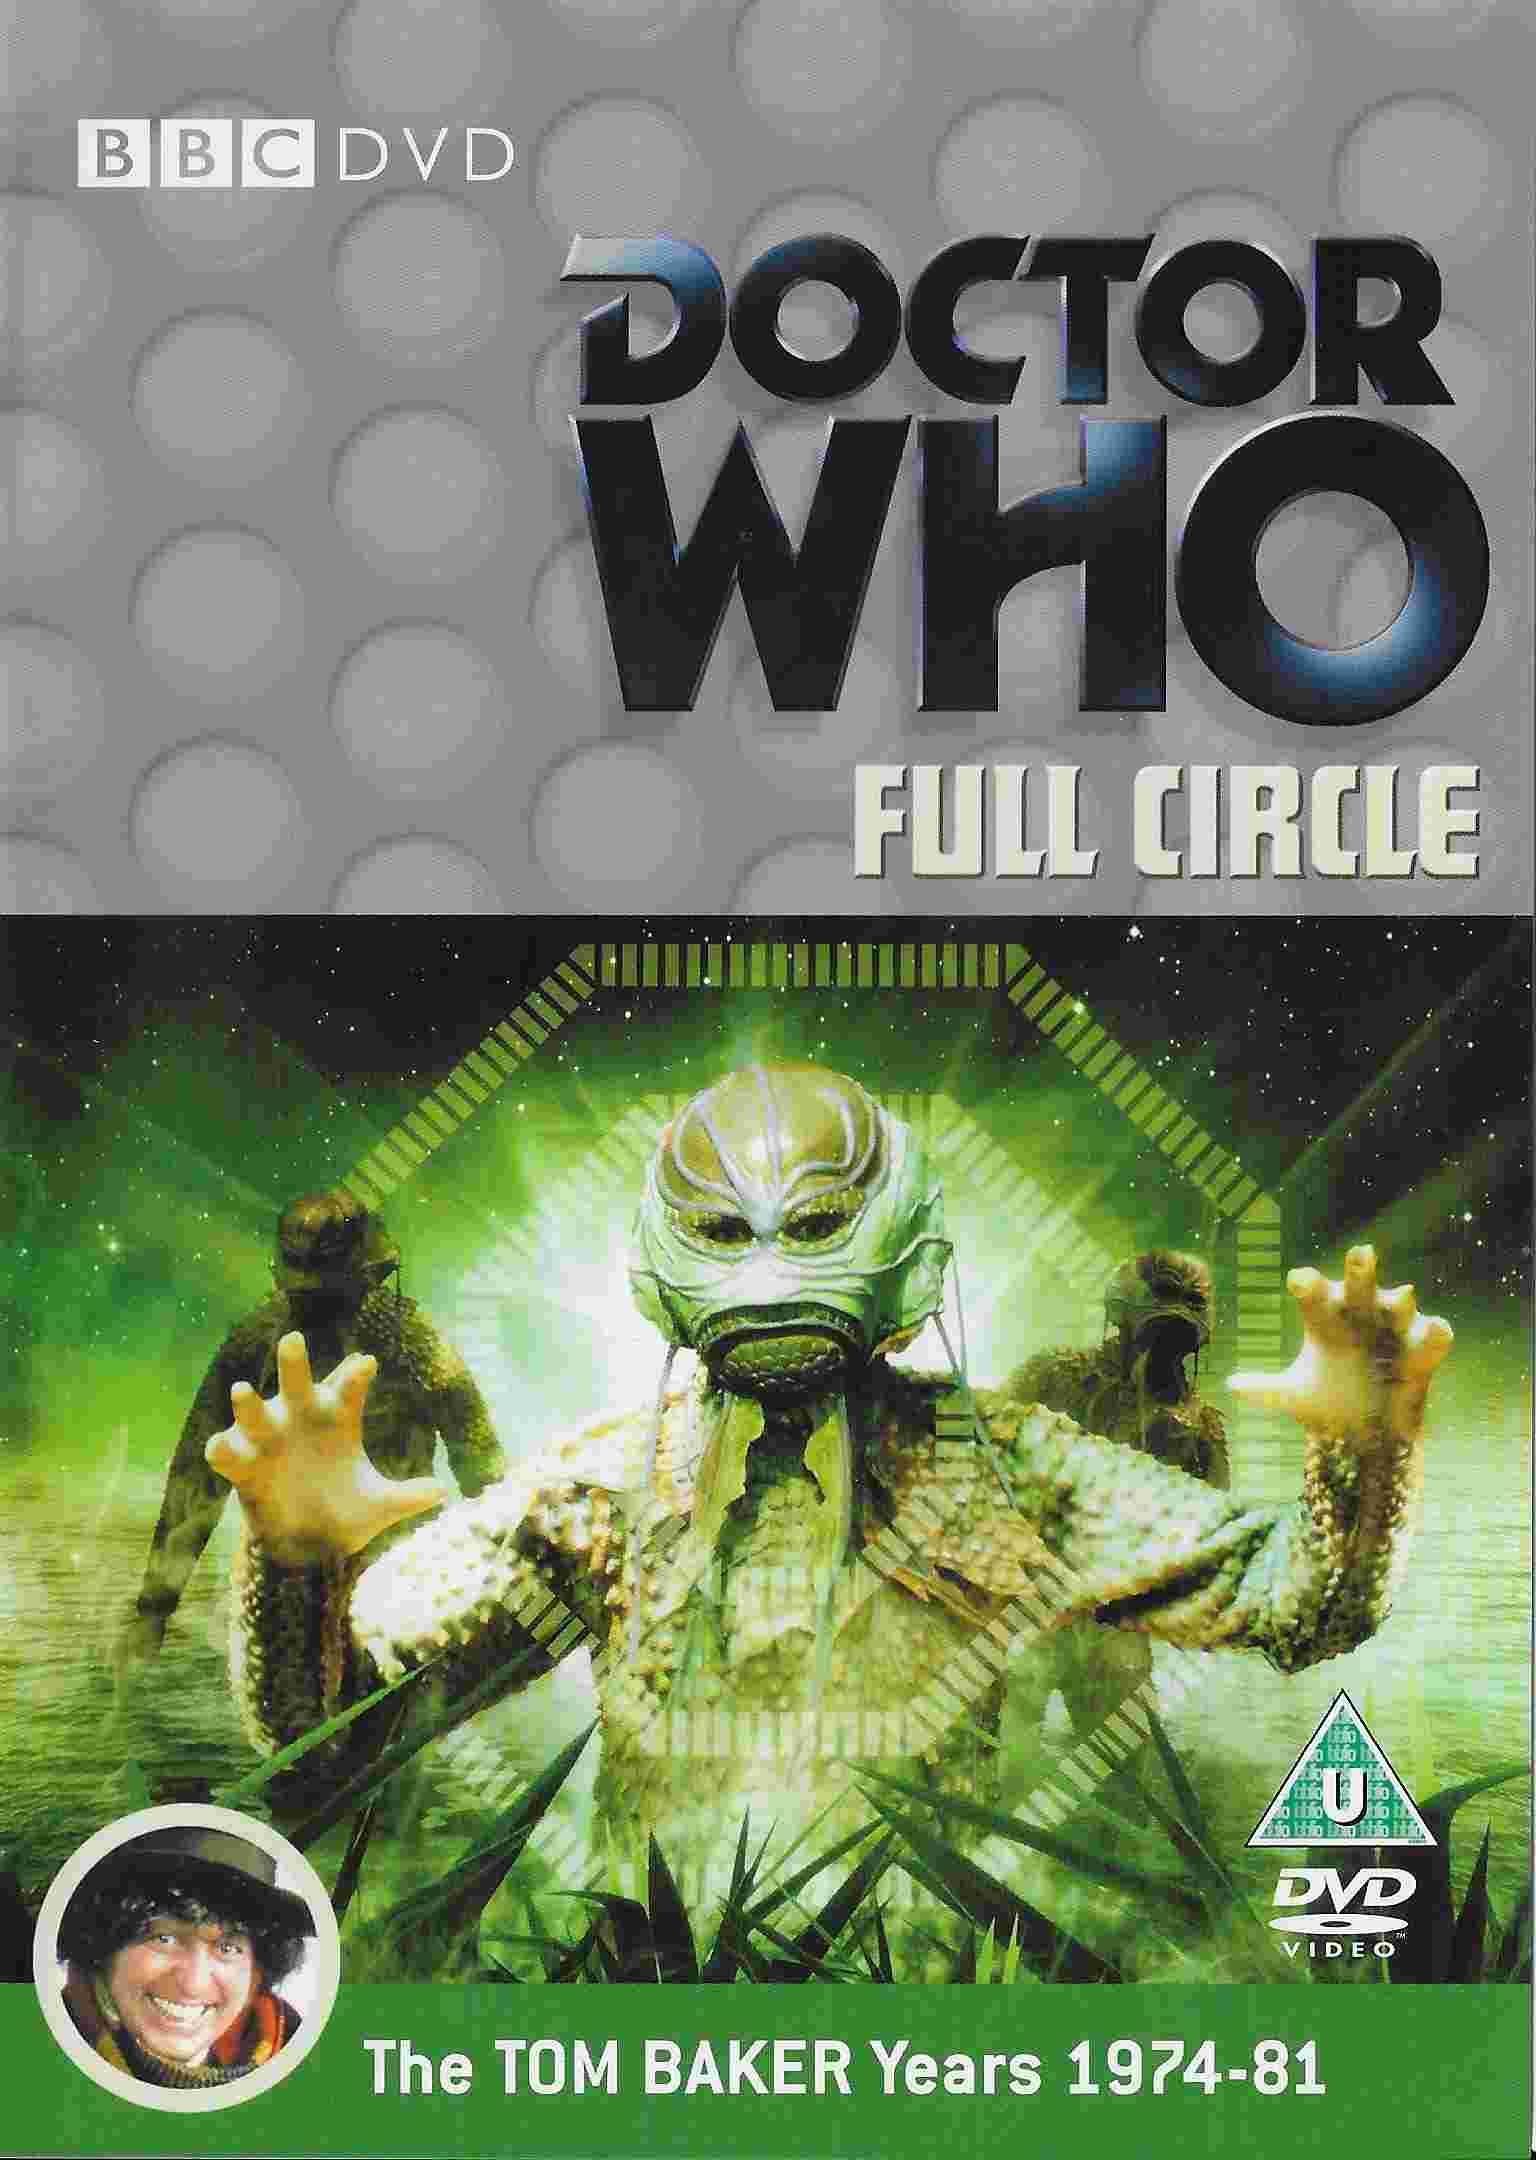 Image of BBCDVD 1835A